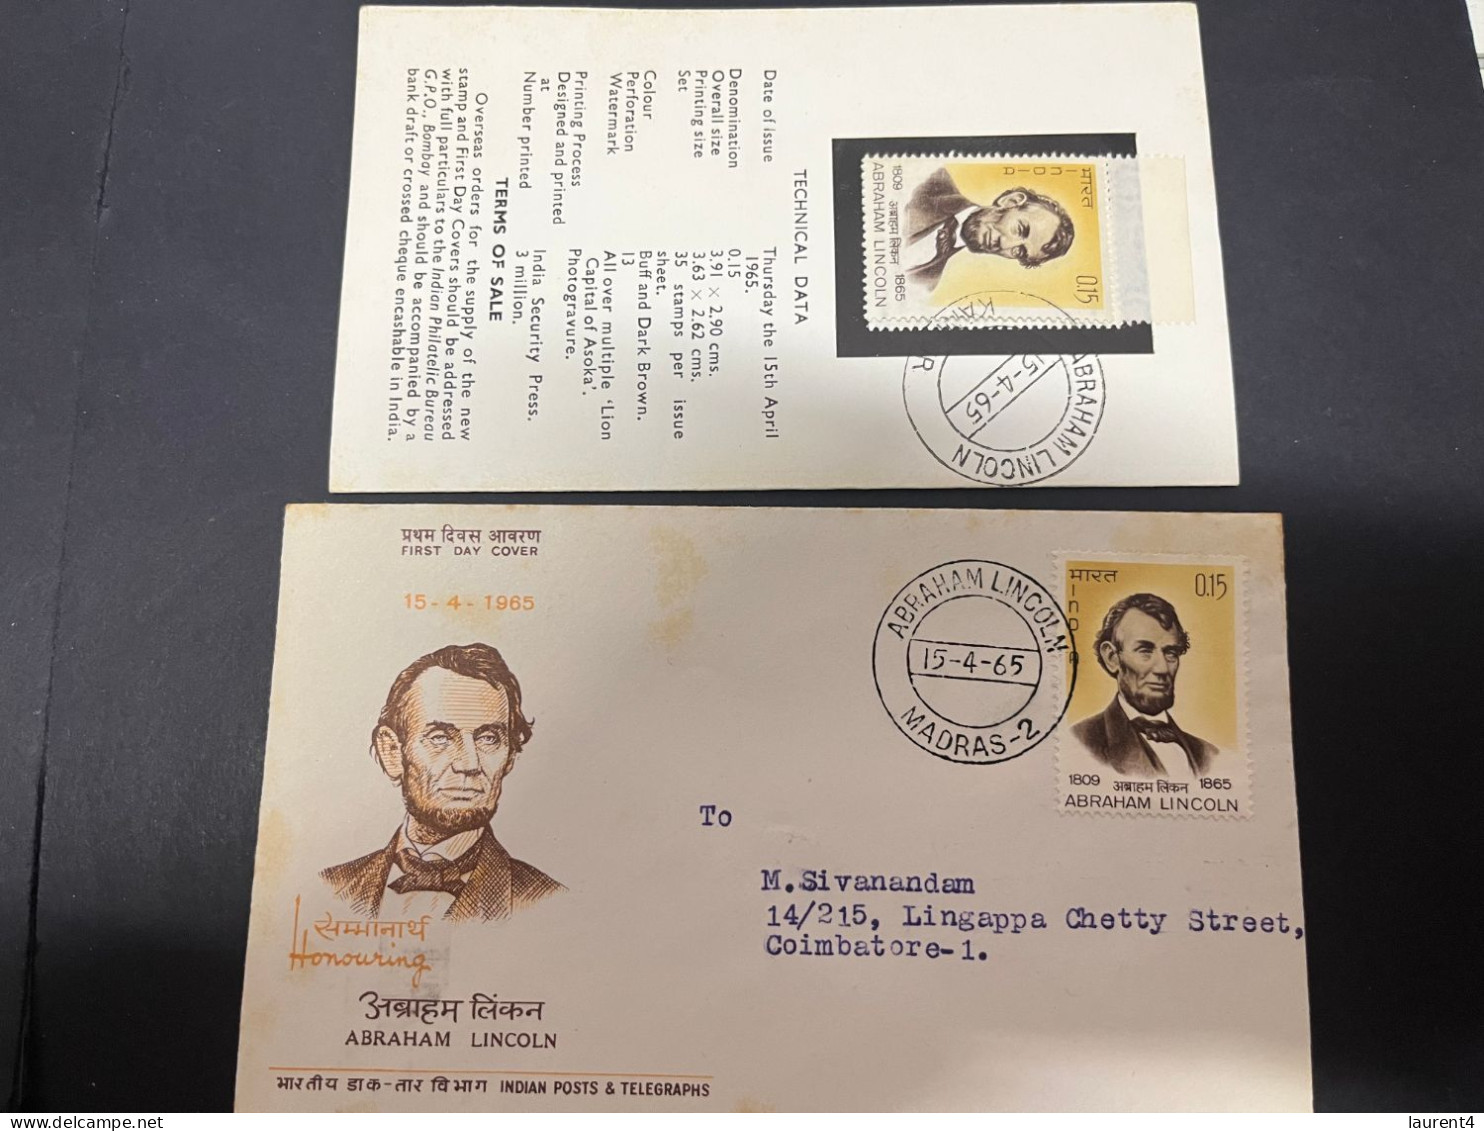 7-5-2024 (4 Z 24) INDIA FDC Cover - 1965 - Abraham Lincoln (with Insert) - FDC